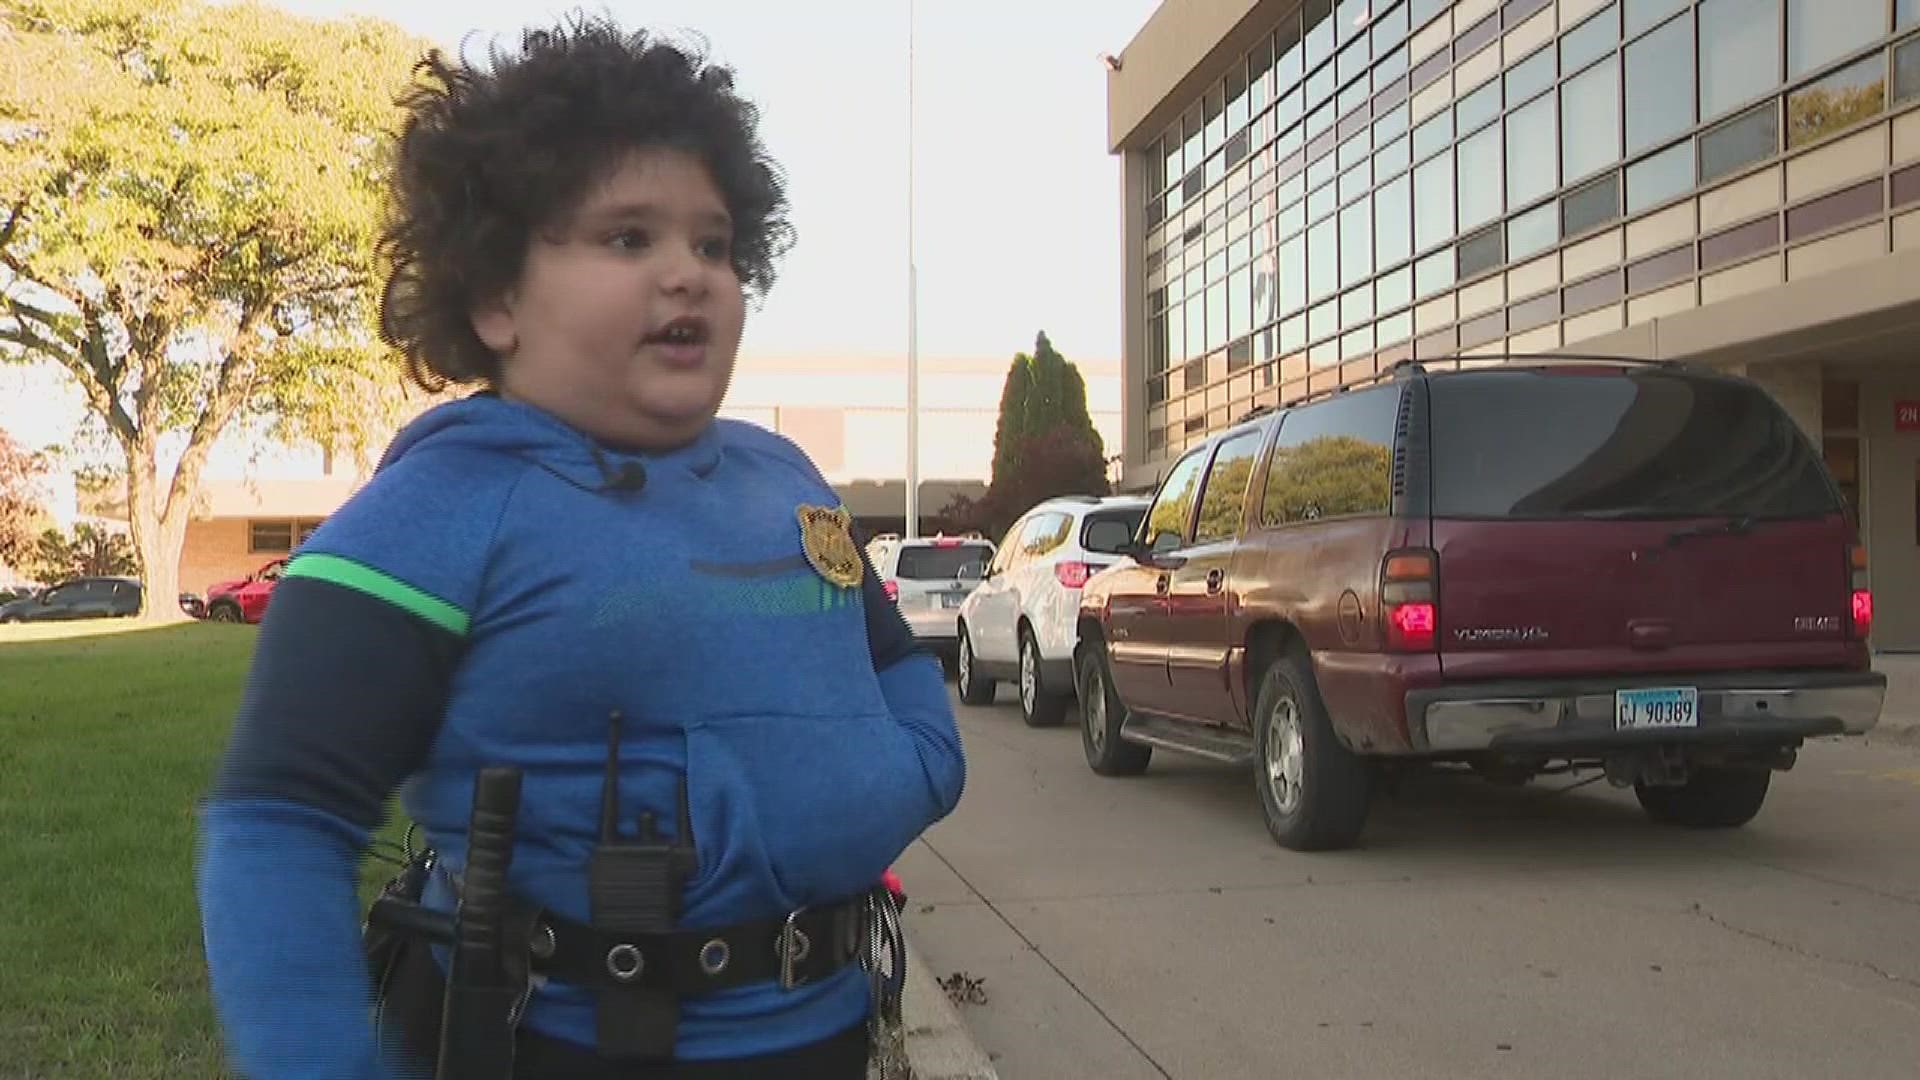 Aktham Aleiwi wants to be a cop when he grows up, and is getting his practice in now